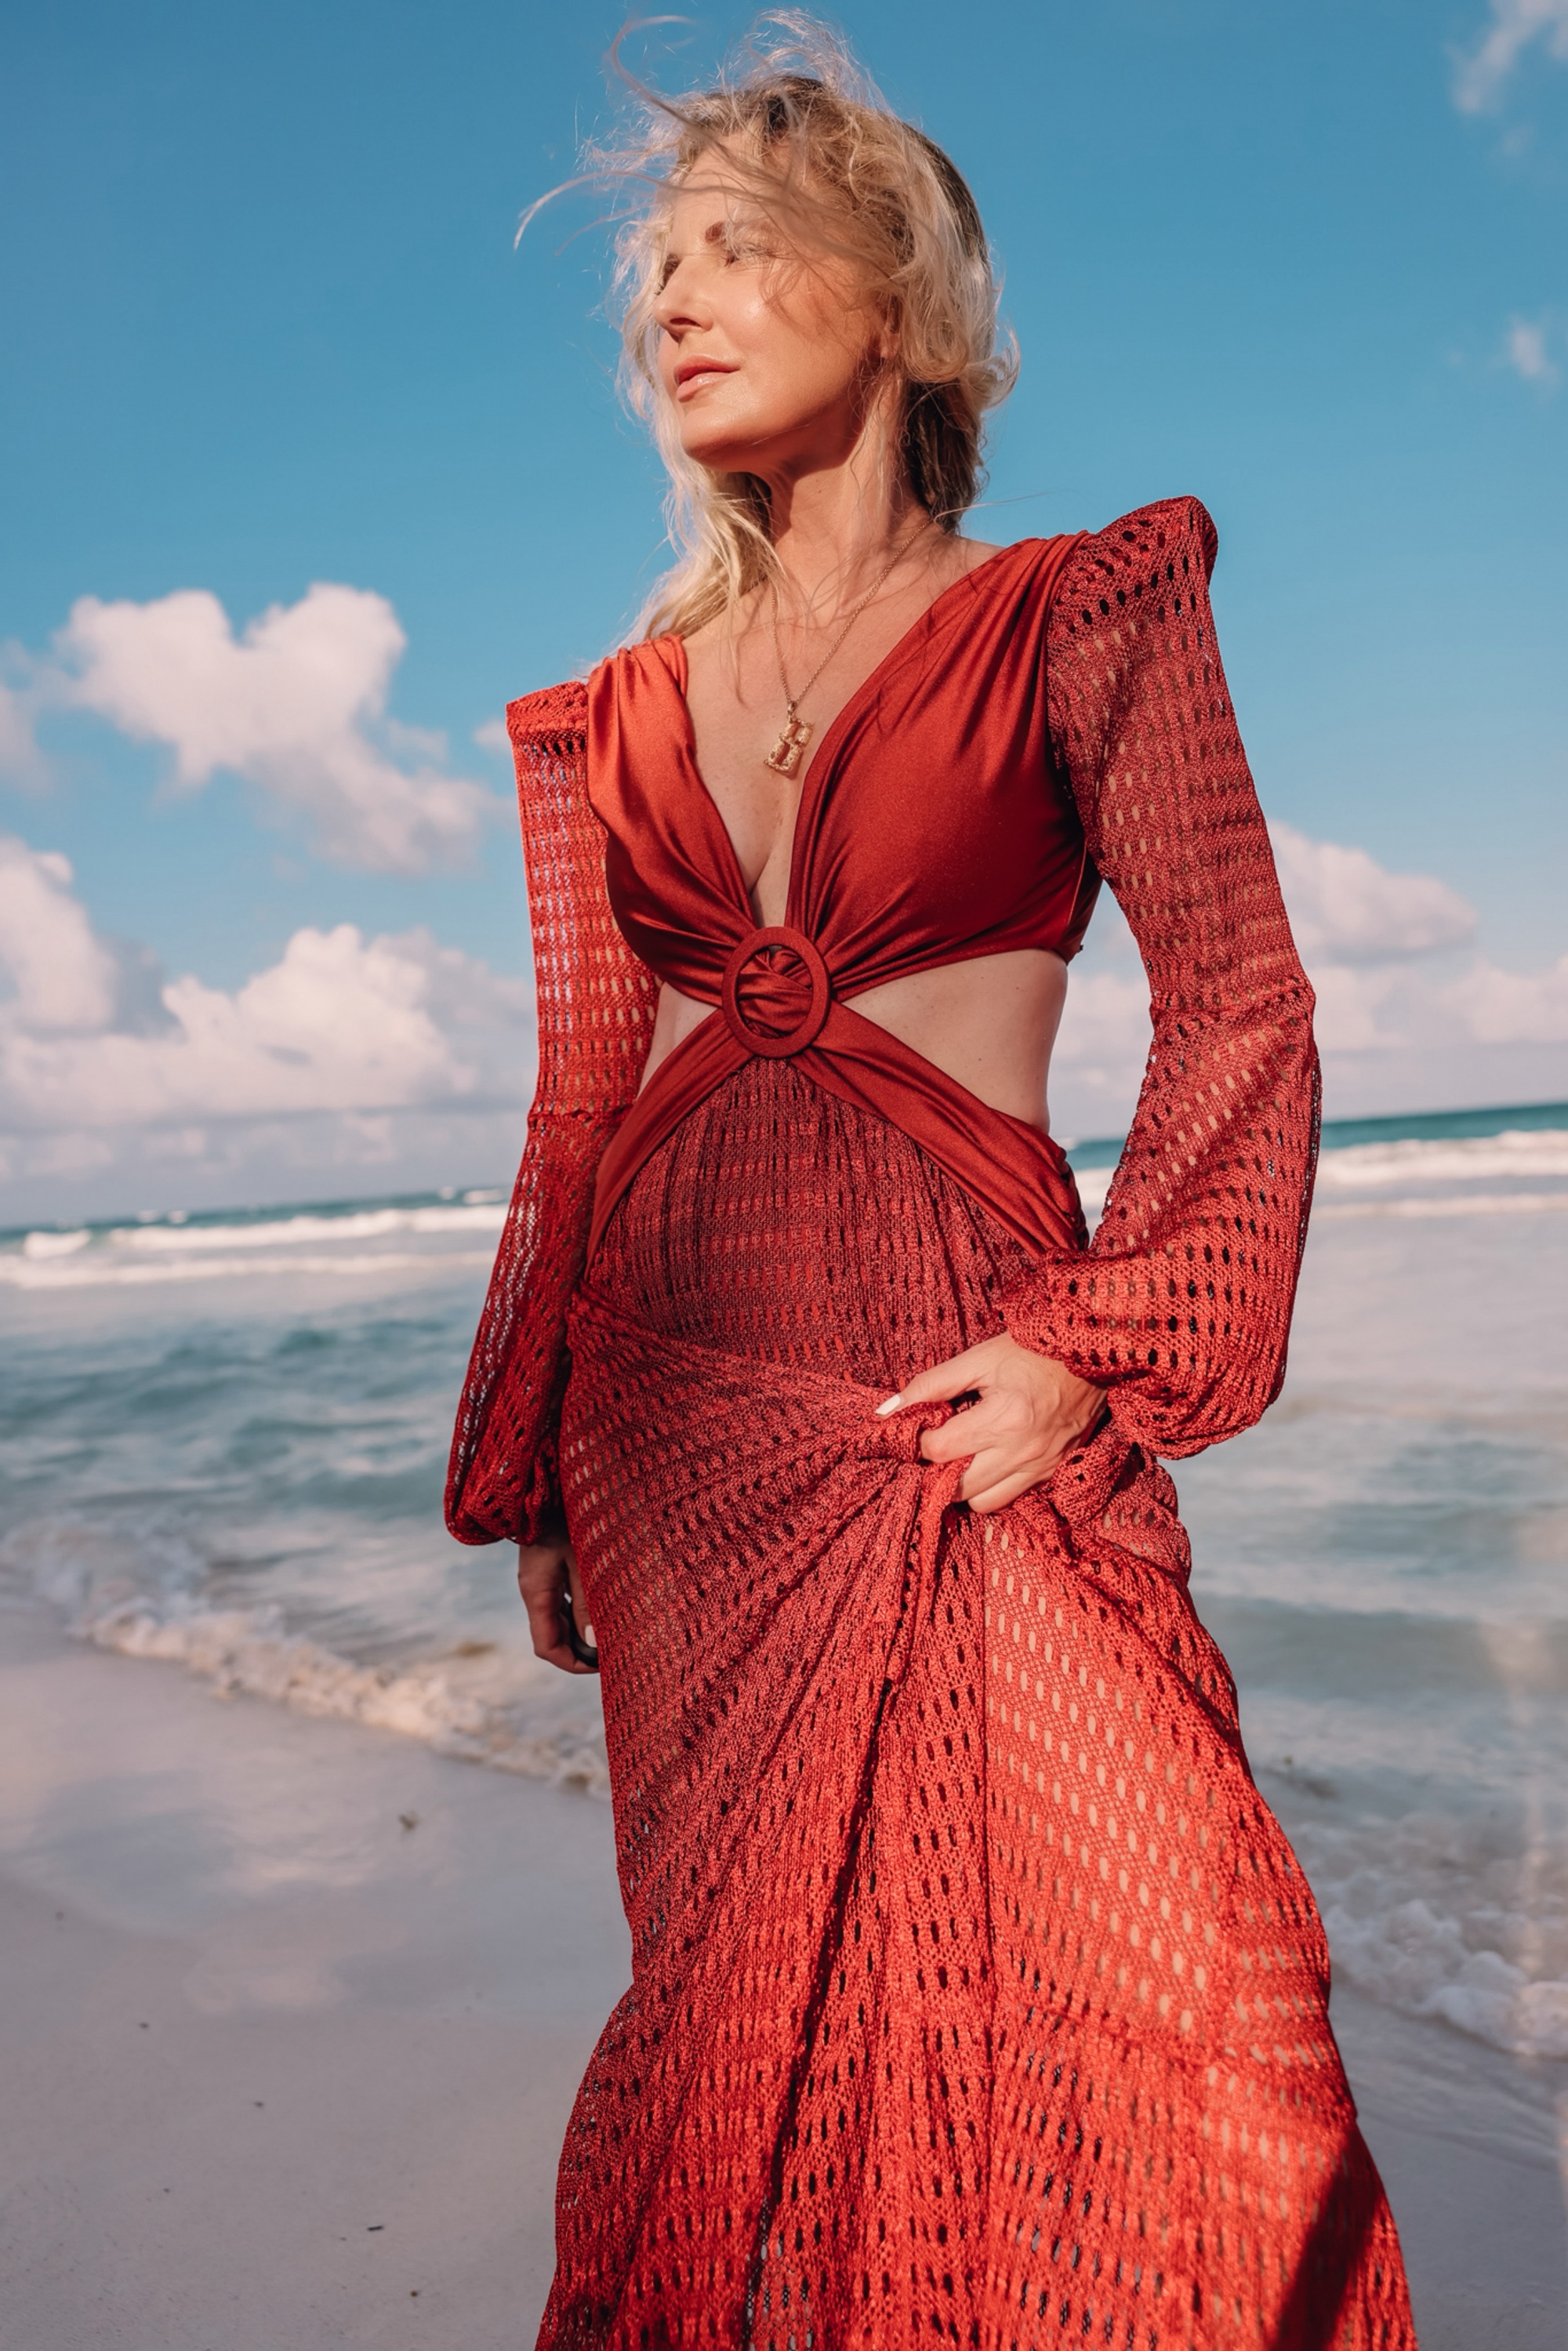 maxi dress by Patbo for the beach in crochet fabric and rust color in Tulum Mexico on fashion over 40 blogger Erin Busbee,maxi dresses, killer maxi dresses, sexy maxi dresses